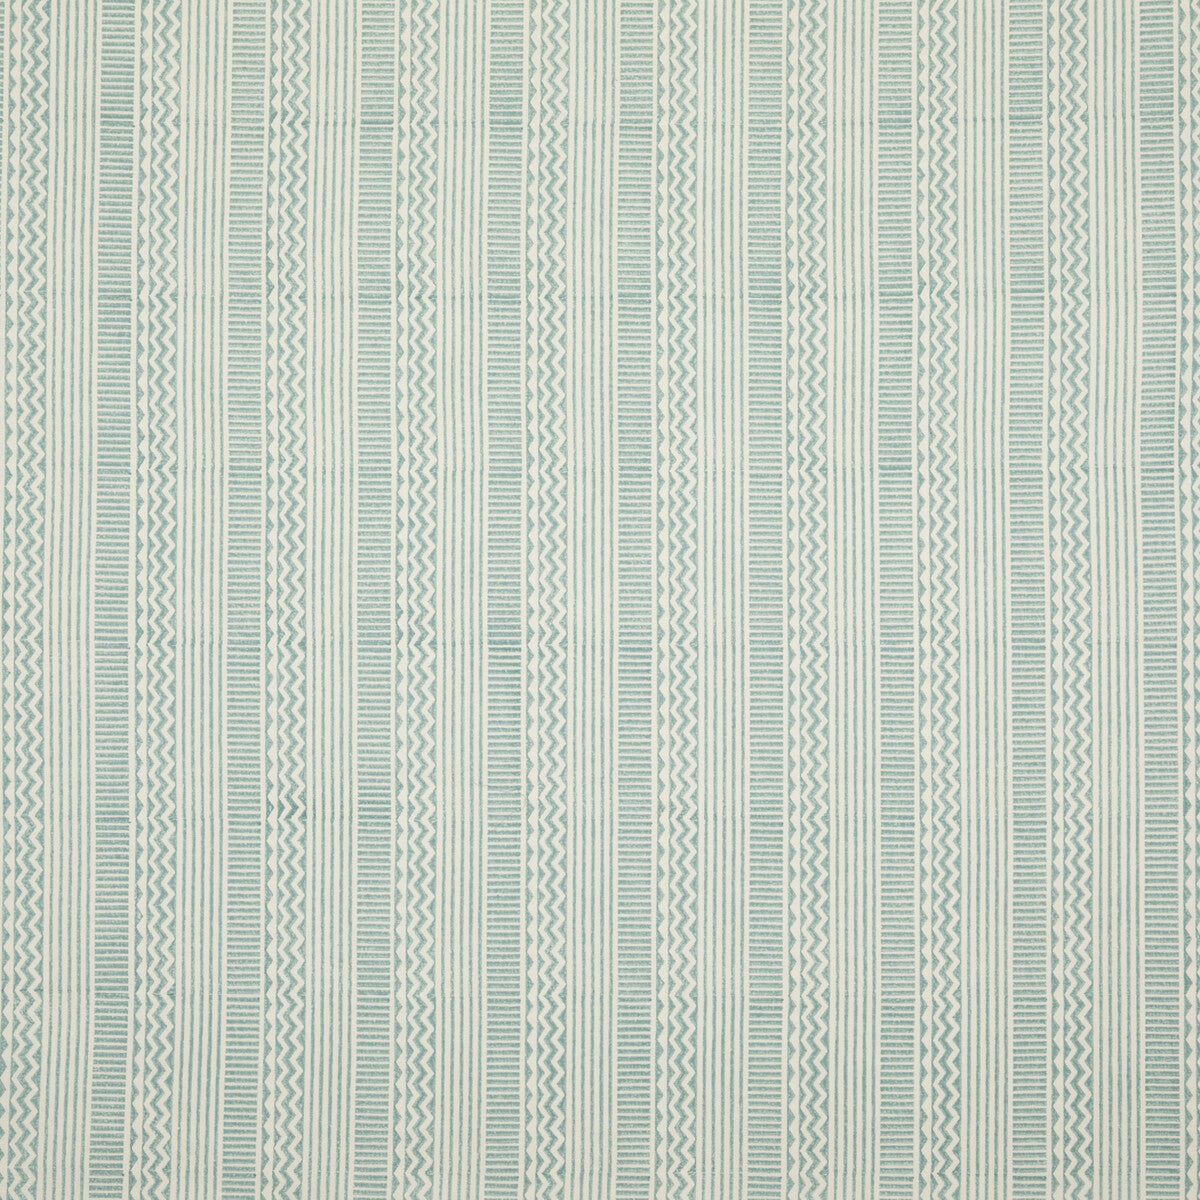 Tolosa fabric in aqua color - pattern PP50450.3.0 - by Baker Lifestyle in the Homes &amp; Gardens III collection